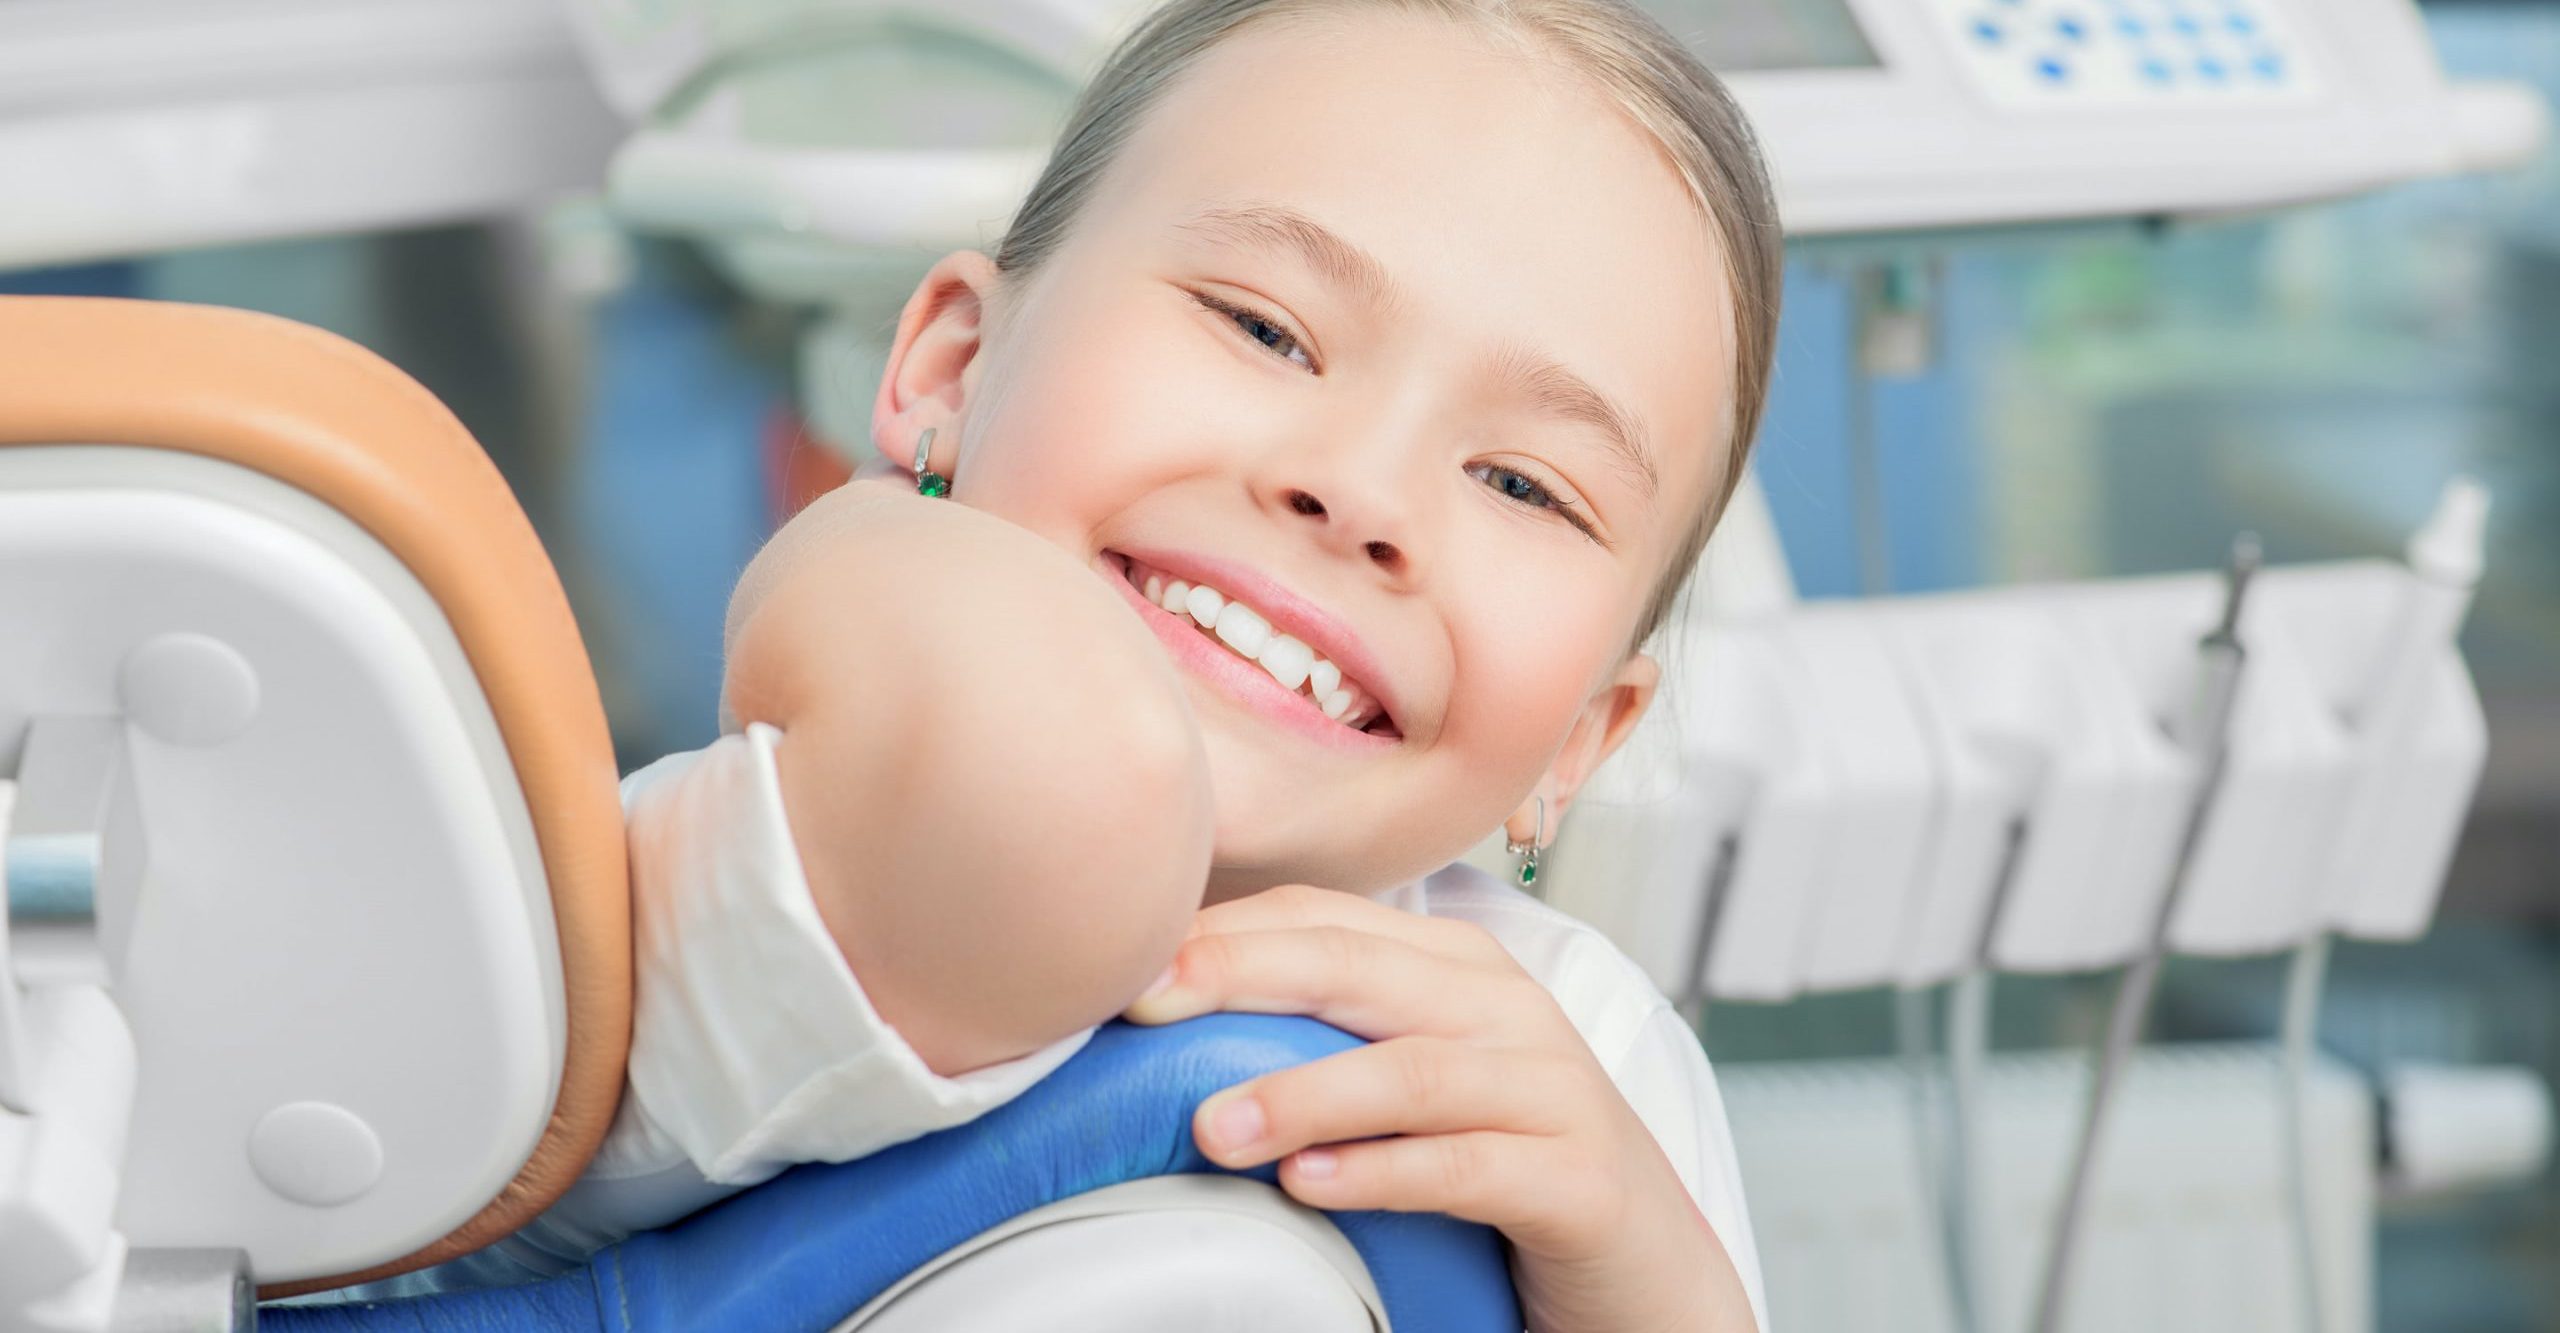 A photo of a young patient after her pediatric dentist visit